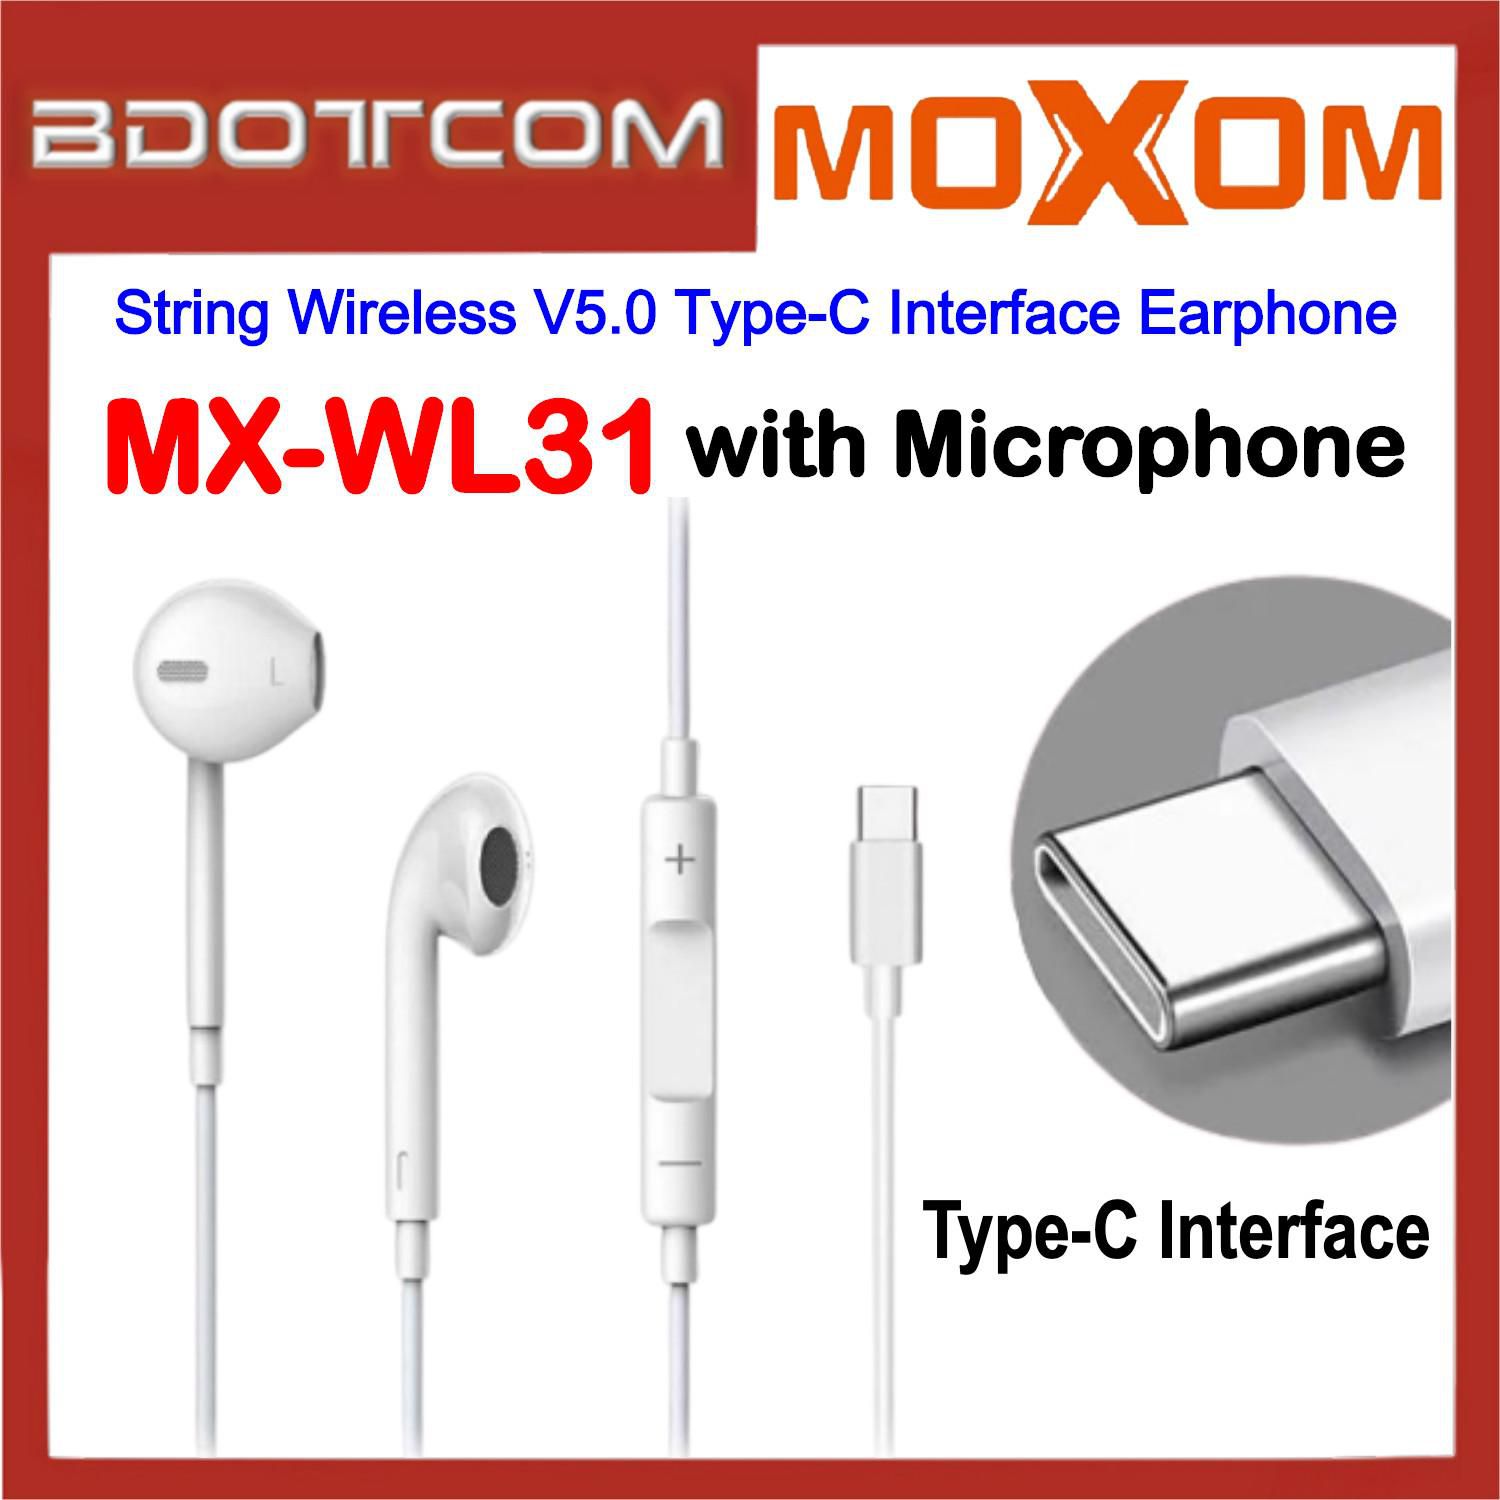 Moxom MX-WL31 String Wireless V5.0 Type-C Interface Earphone with Microphone